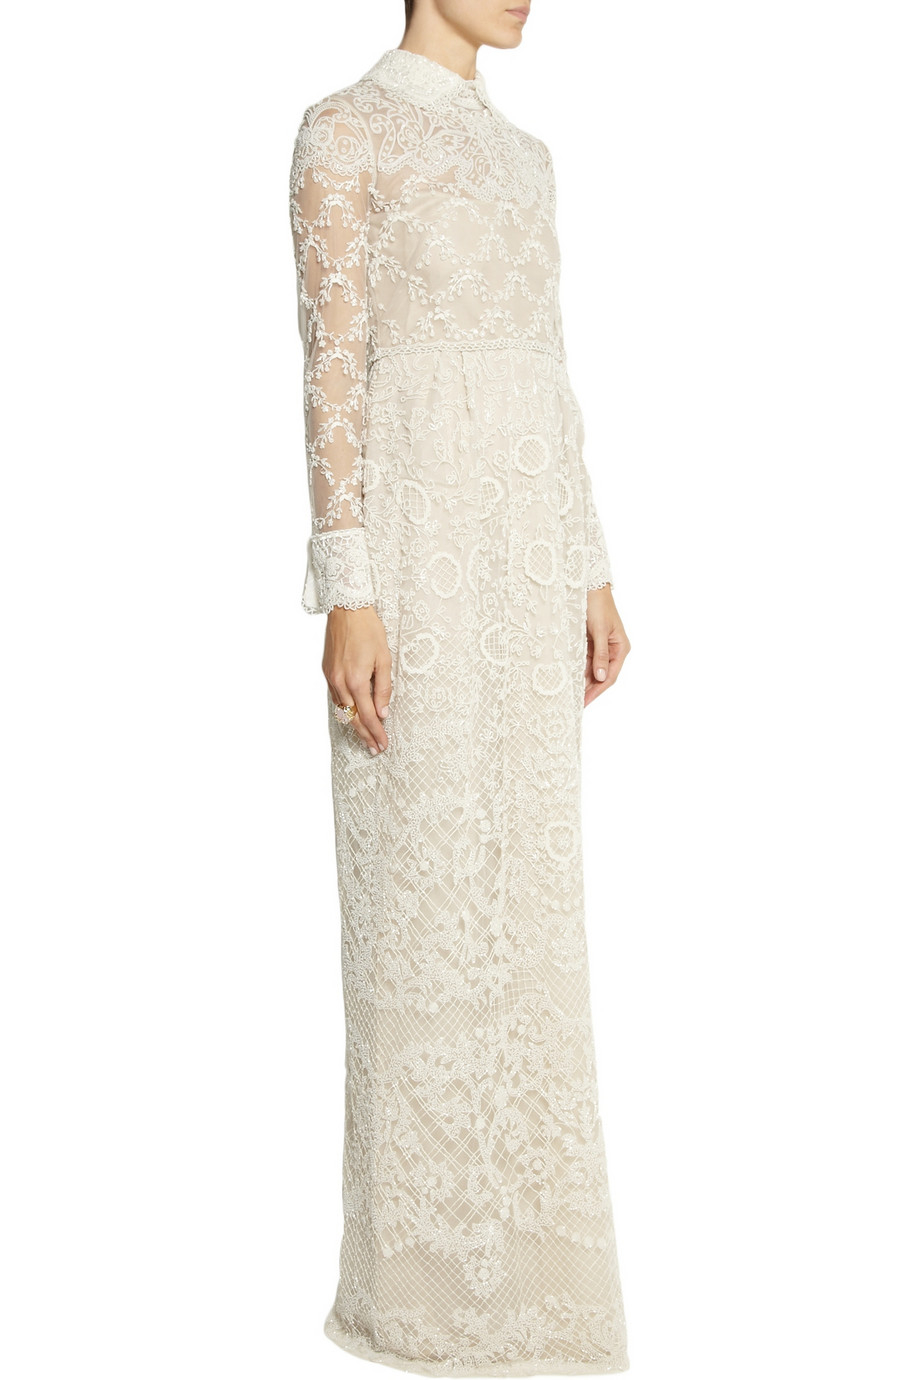 Valentino Beaded Tulle Gown in Ivory (Natural) - Lyst